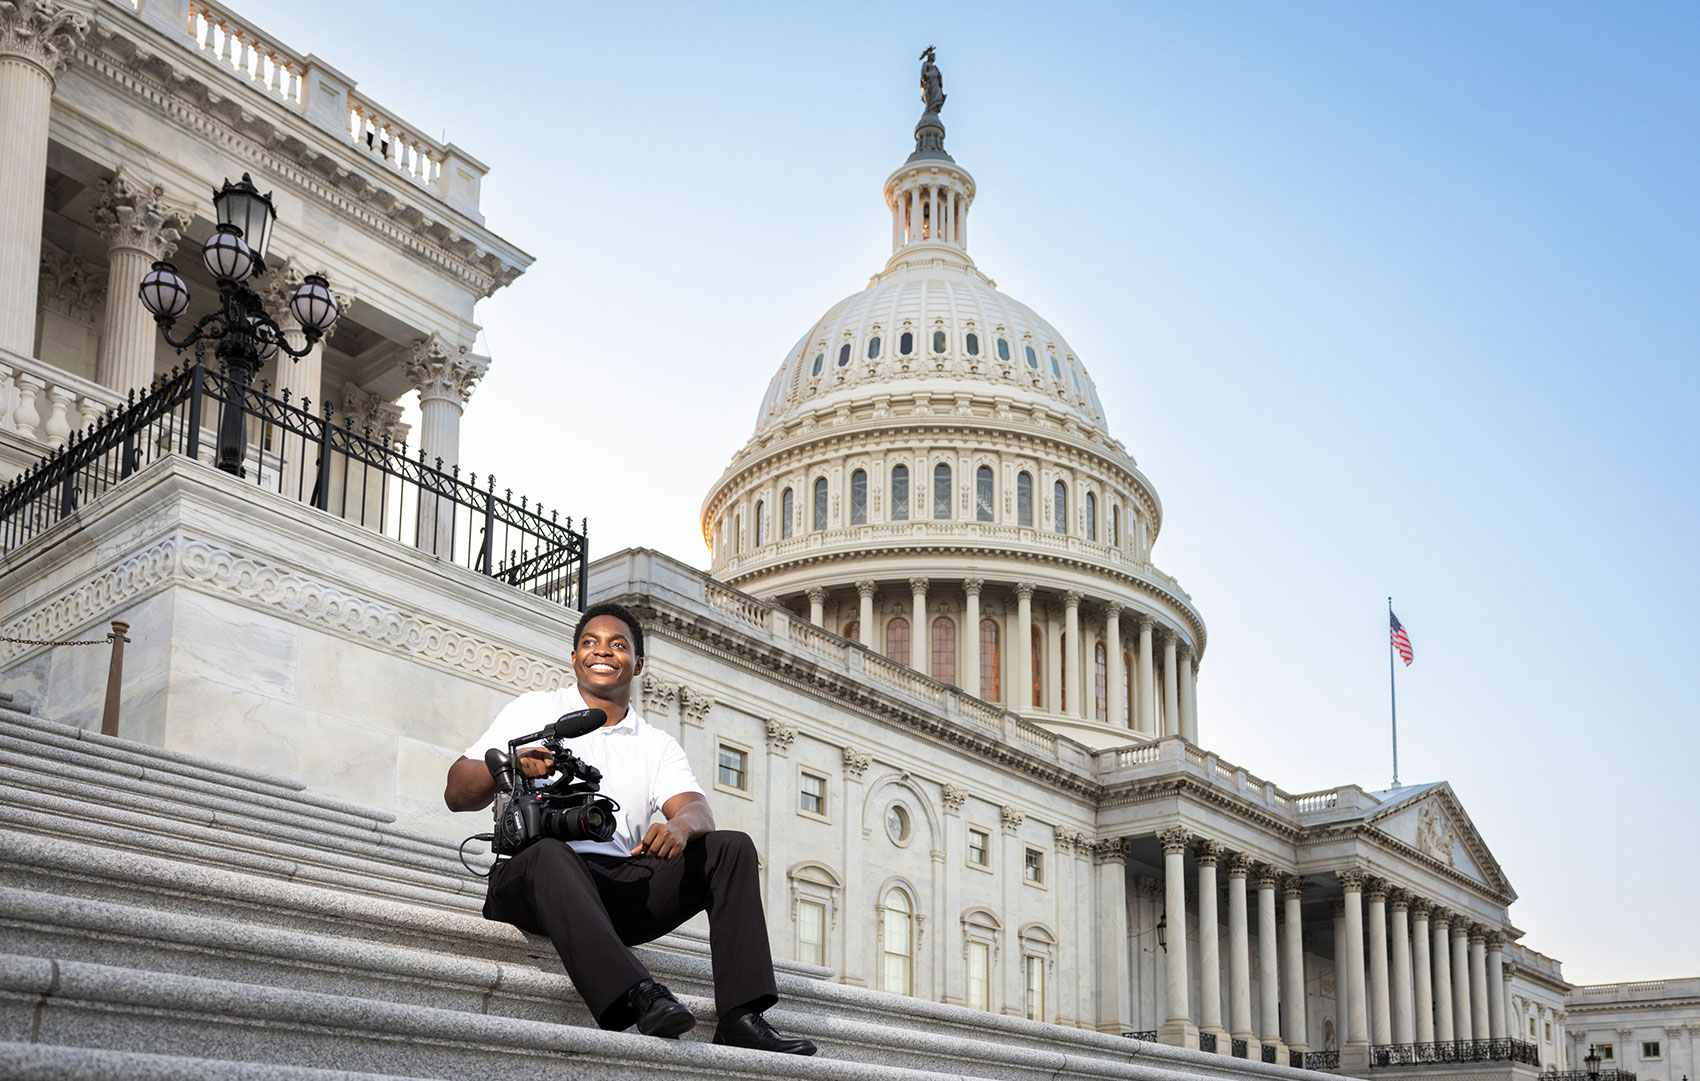 Mason student Jaques Lykes majored in Film and Video studies interning at House Creative Services, Chief Administrative Officer at the U.S. House of Representatives in Washington DC. Photo by: Ron Aira/Creative Services/George Mason University